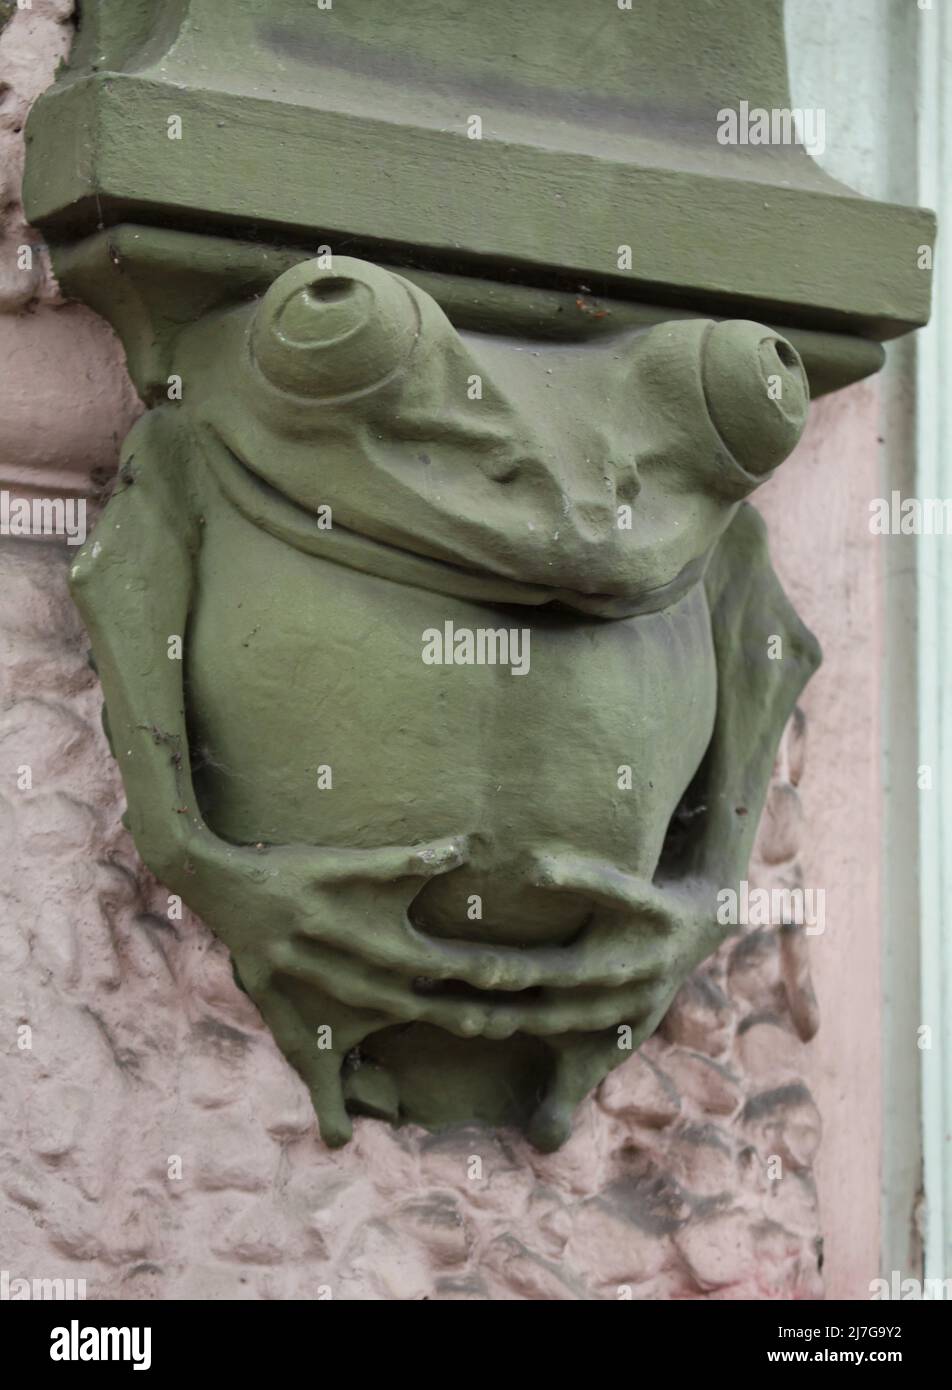 Funny frog depicted on the console on the revenue house in Ruská Street in Vršovice district in Prague, Czech Republic. The Art Nouveau building designed by Czech architect Osvald Polívka was completed between 1905 and 1906. Stock Photo